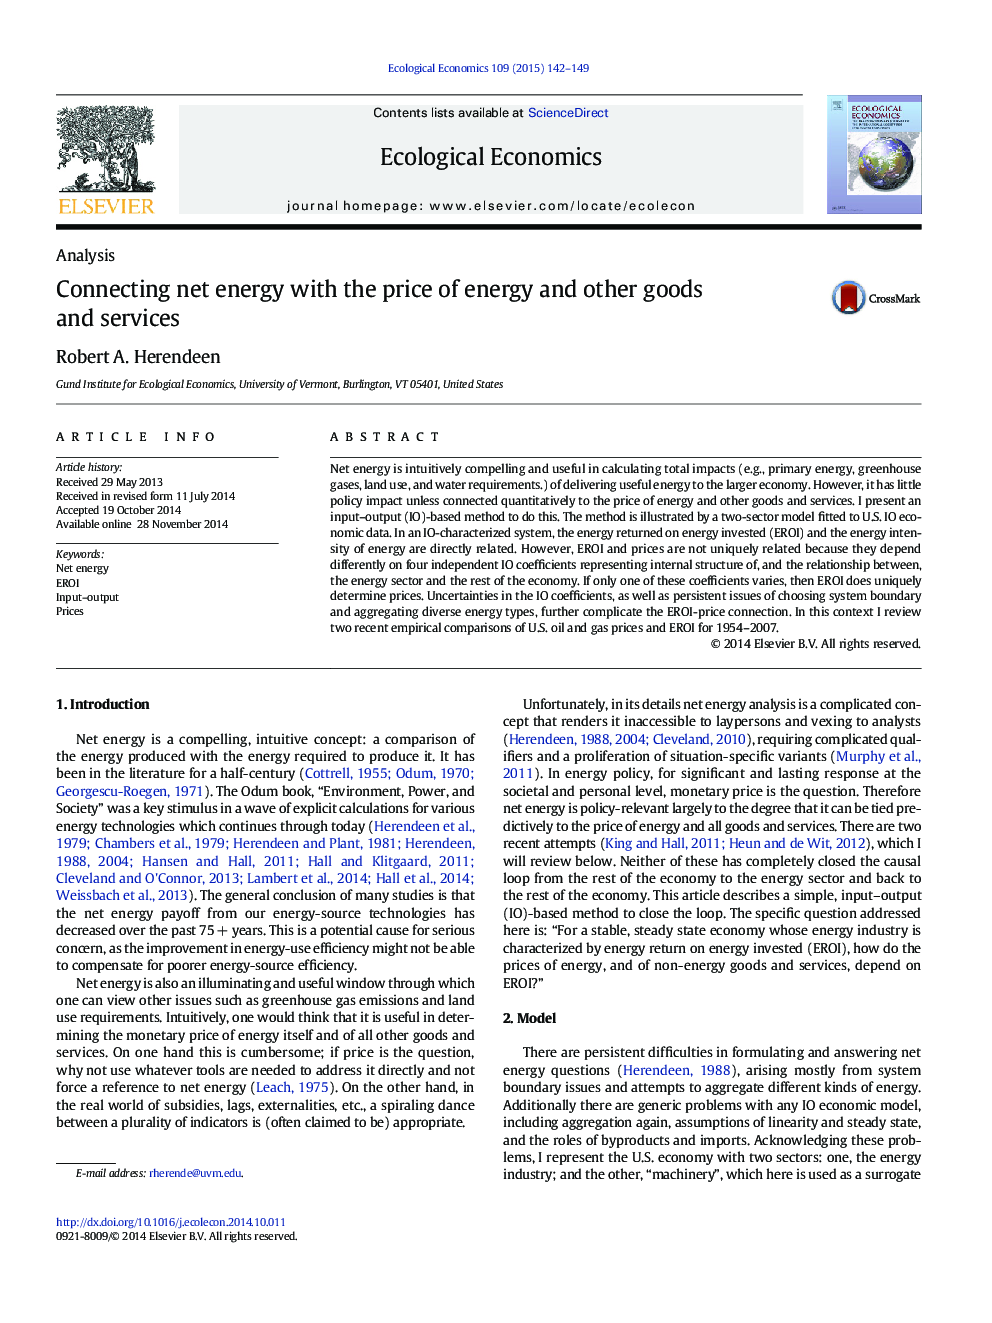 Connecting net energy with the price of energy and other goods and services